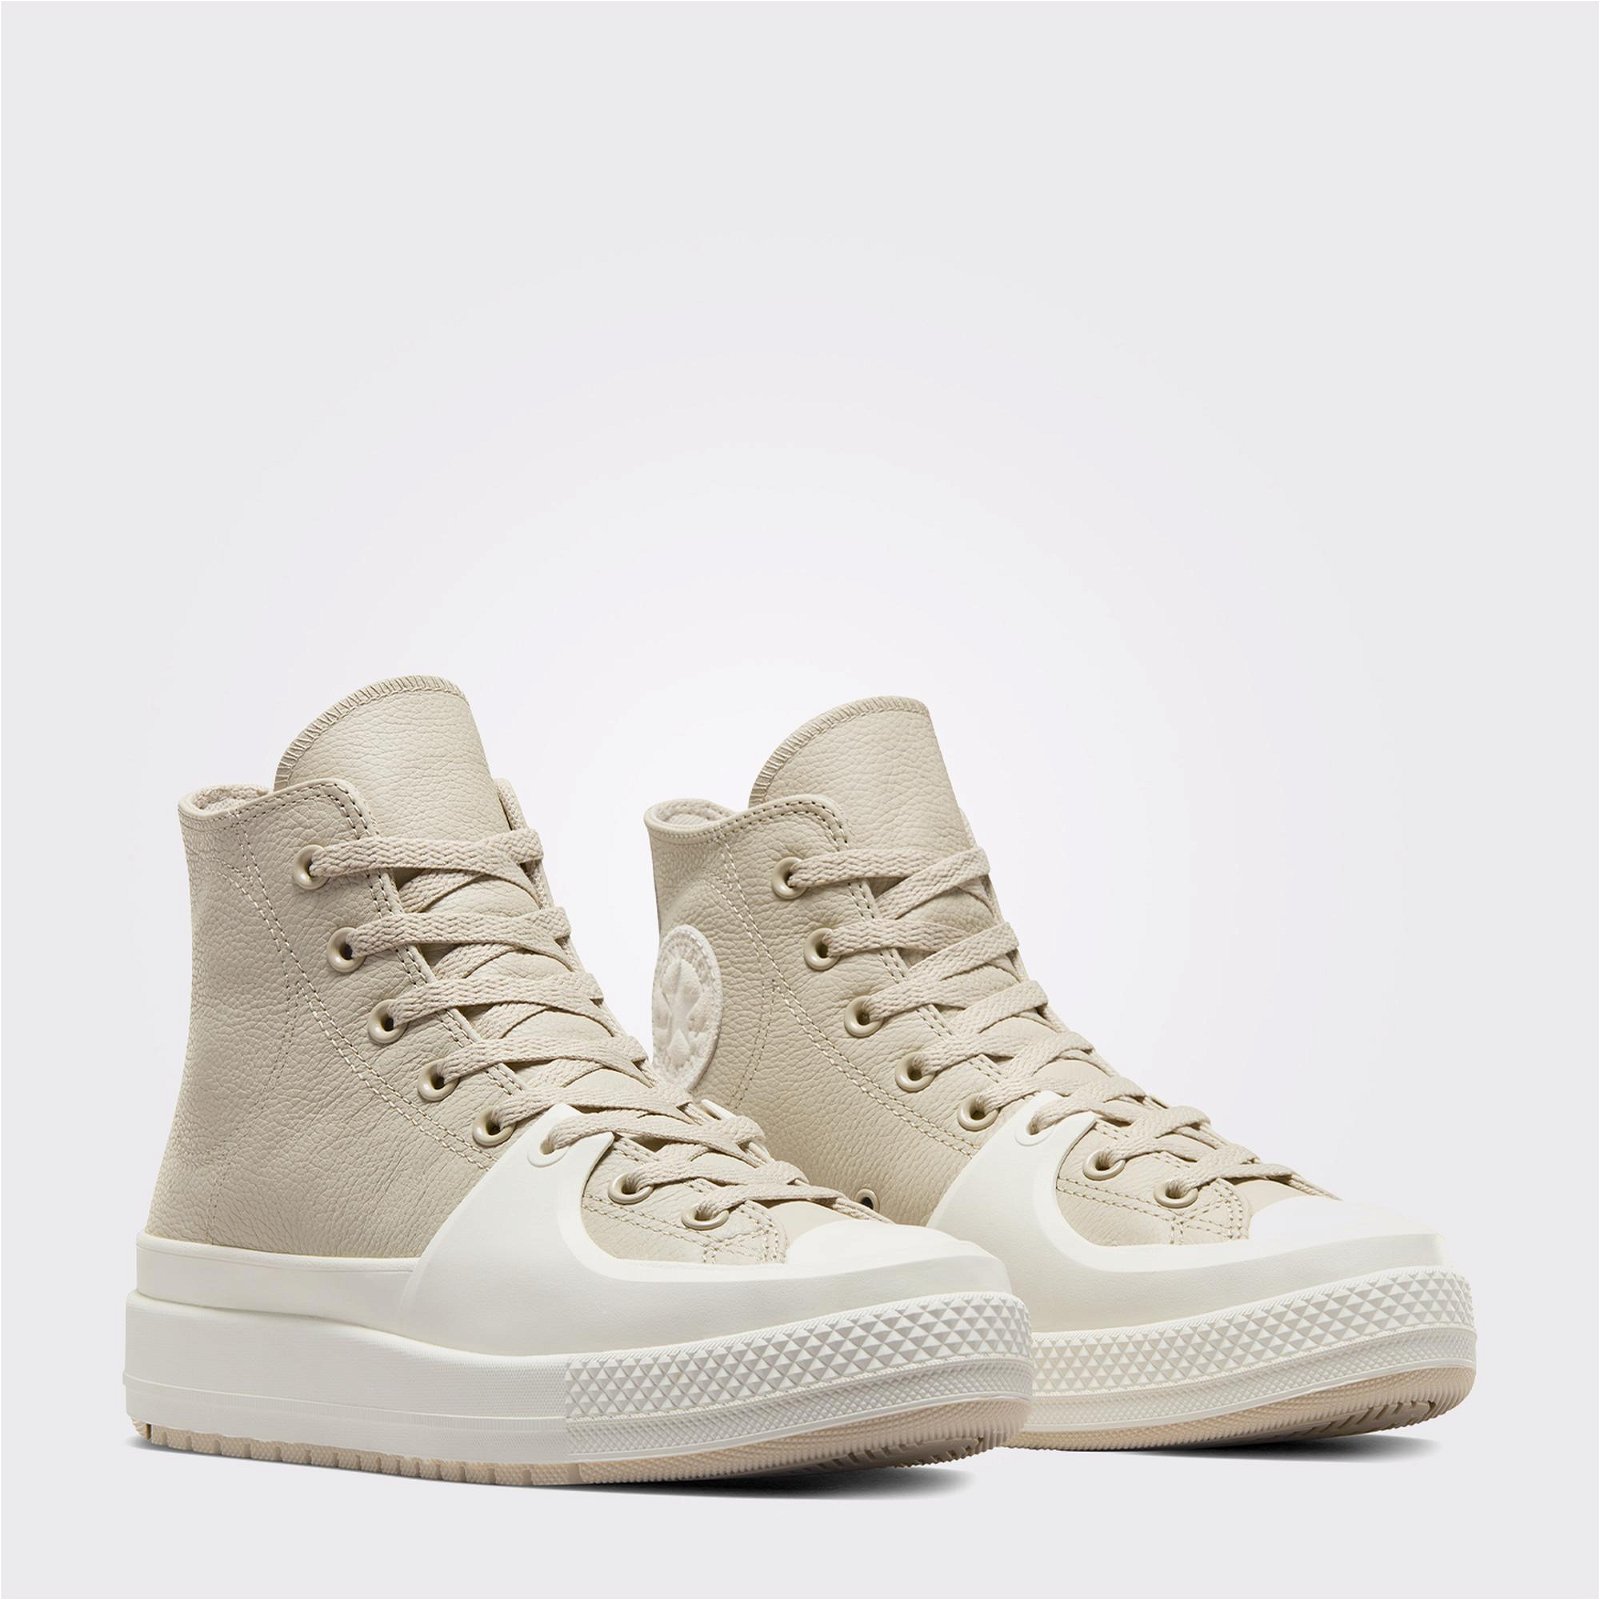 Converse Chuck Taylor All Star Construct Leather Unisex Bej/Siyah Sneaker